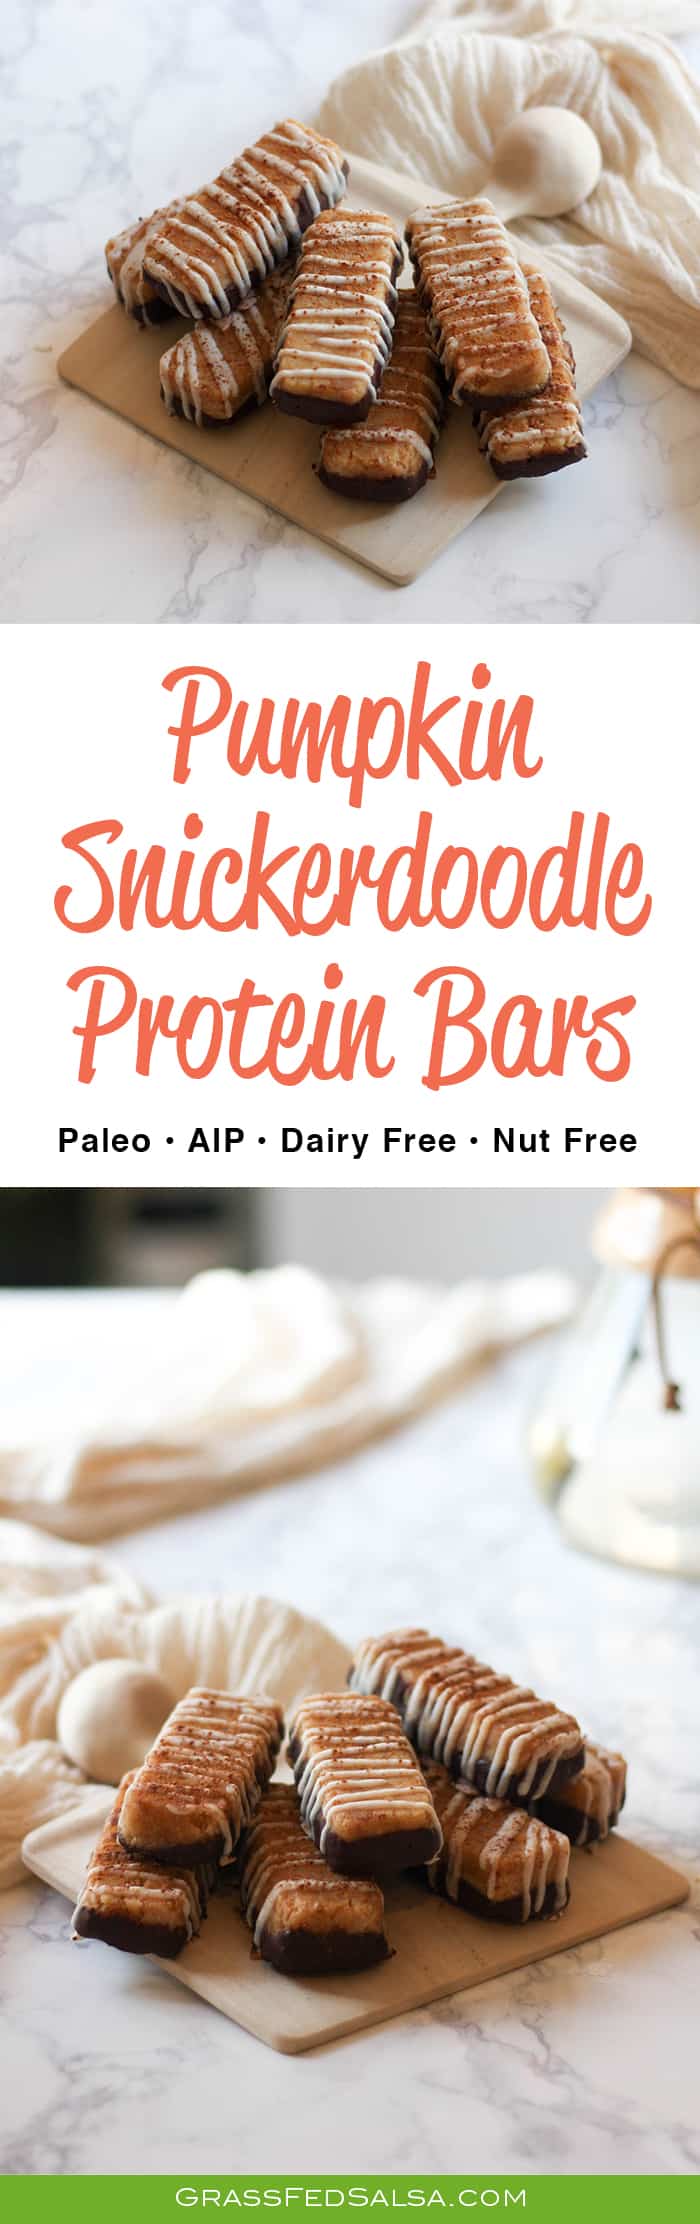 This Pumpkin Snickerdoodle Collagen Protein Bar recipe is both Paleo and Autoimmune Protocol (AIP) compliant. These protein bars are creamy, full of fall flavor, and are truly a healthy addition to your holiday breakfast routine. Grab the recipe below.